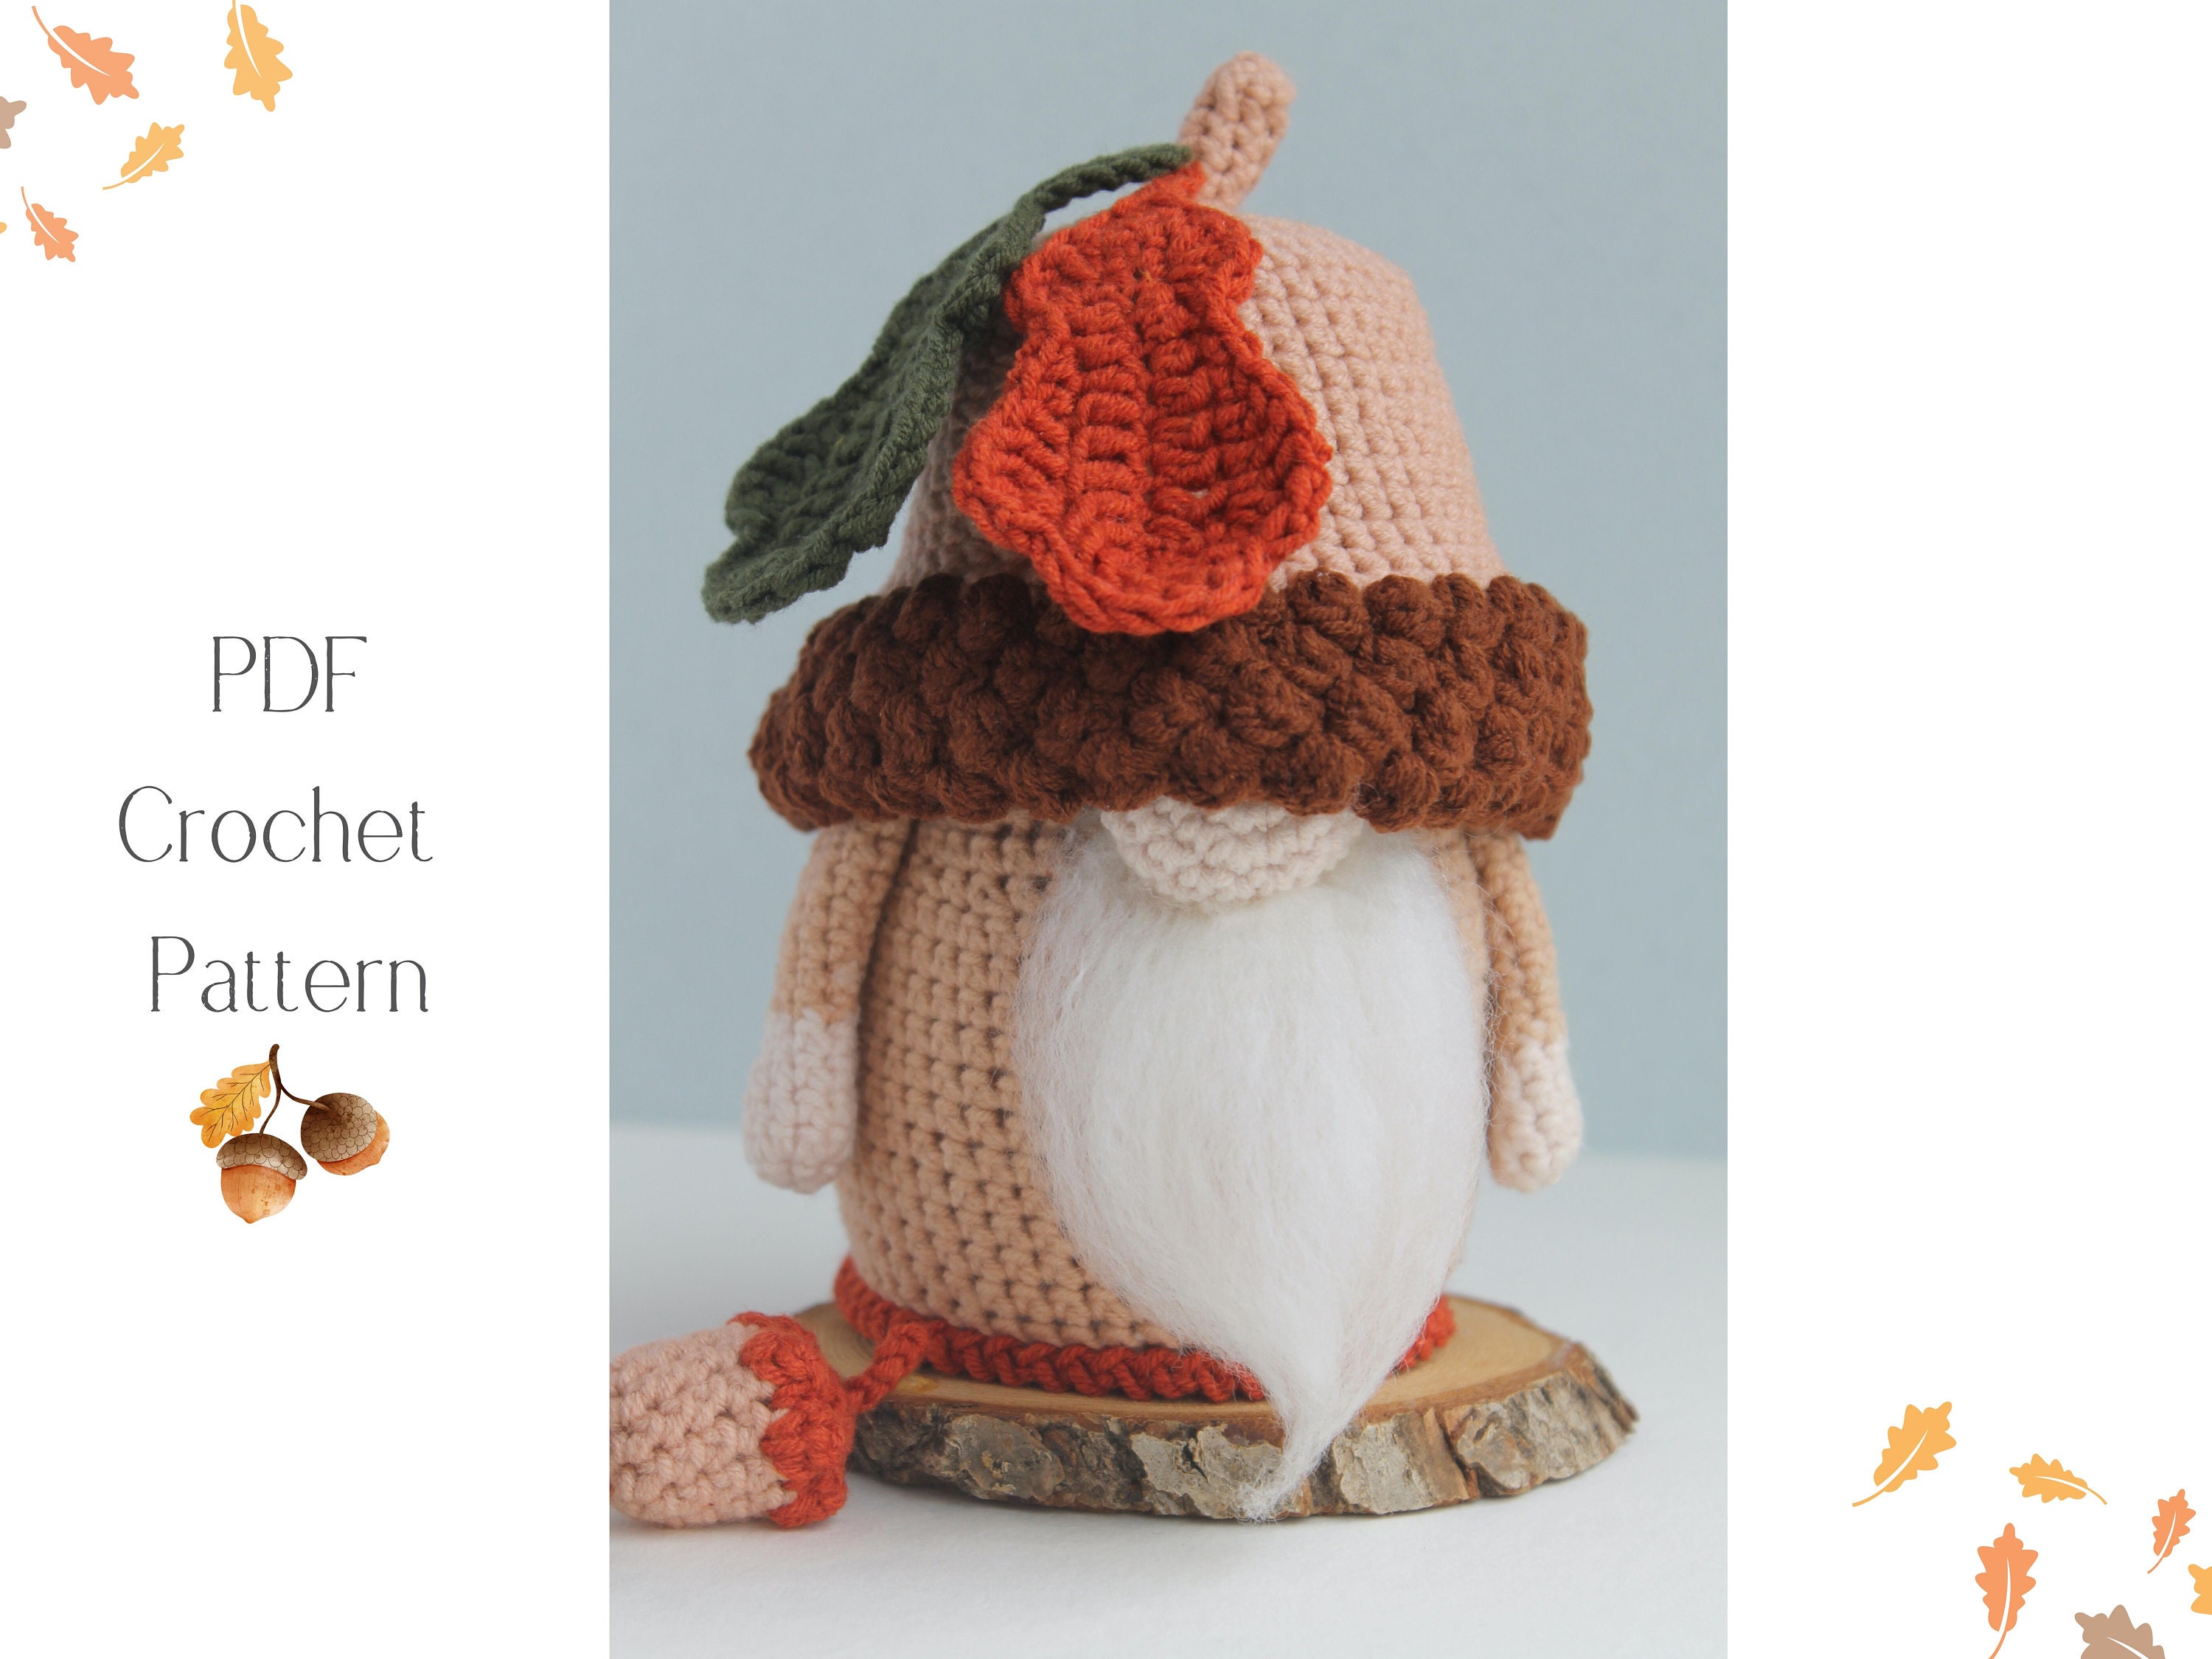 The Big Book of Little Amigurumi: 72 Seriously Cute Patterns to Crochet [Book]